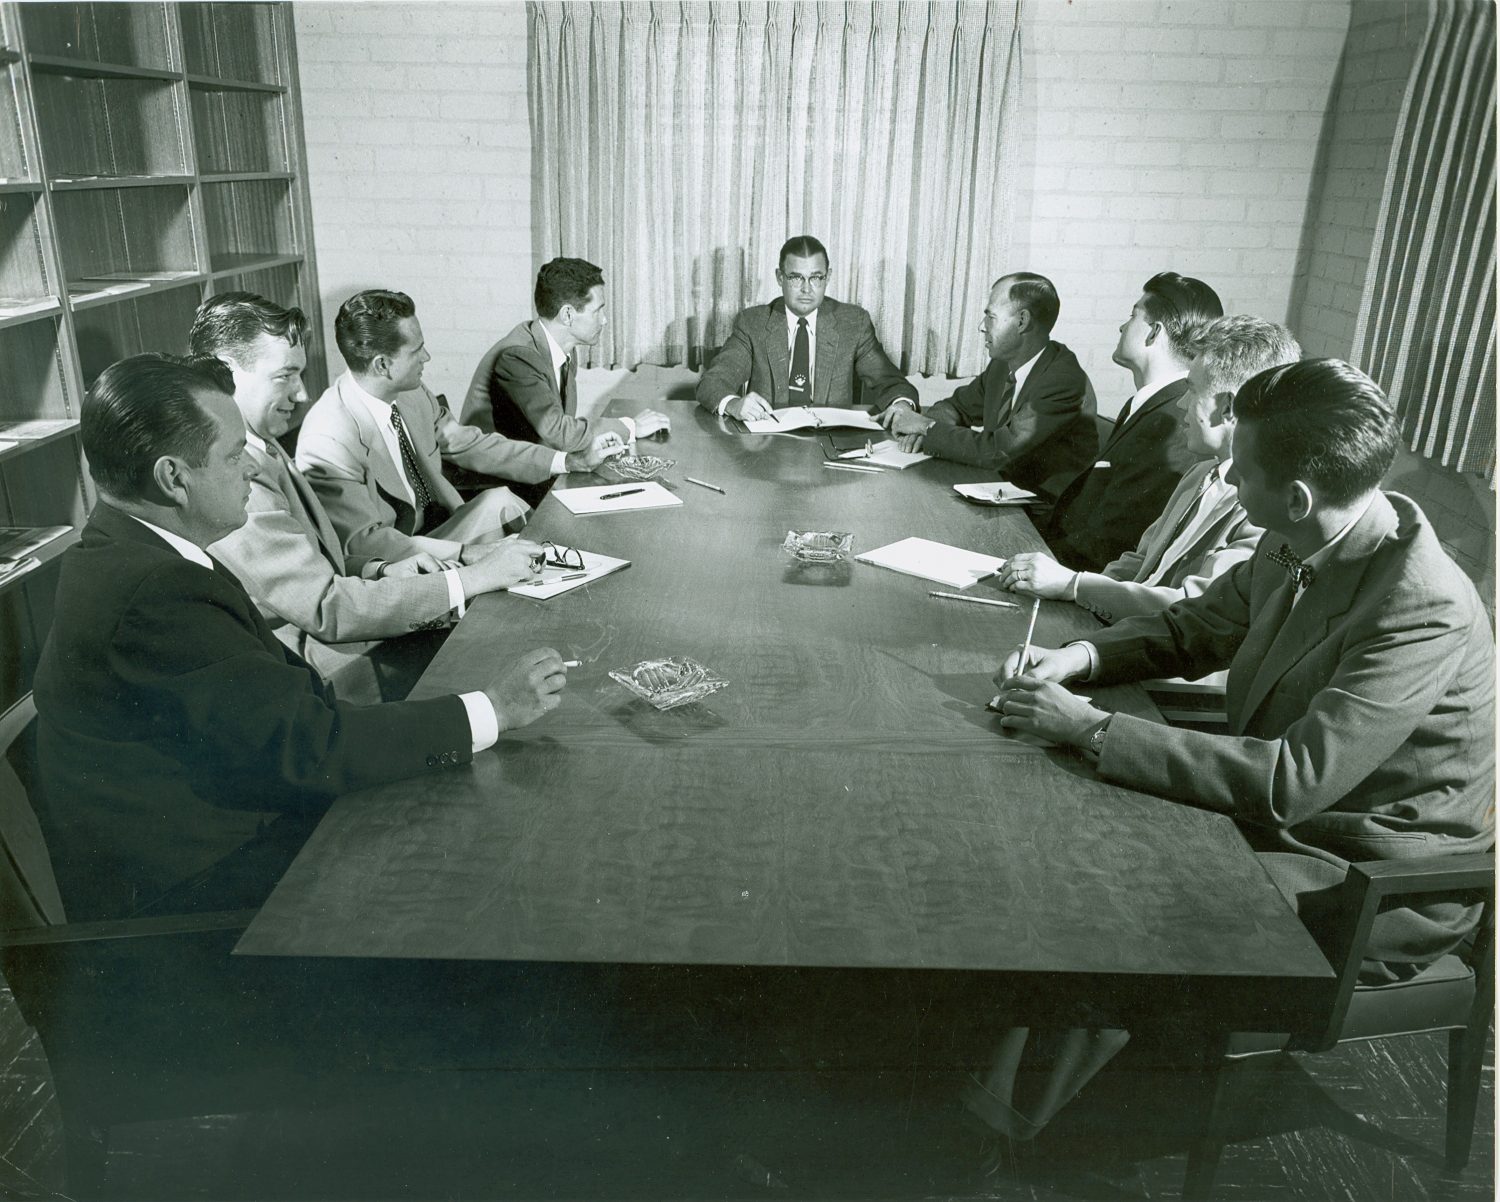 Norm Neely and his sales team seated around a conference table in 1954.